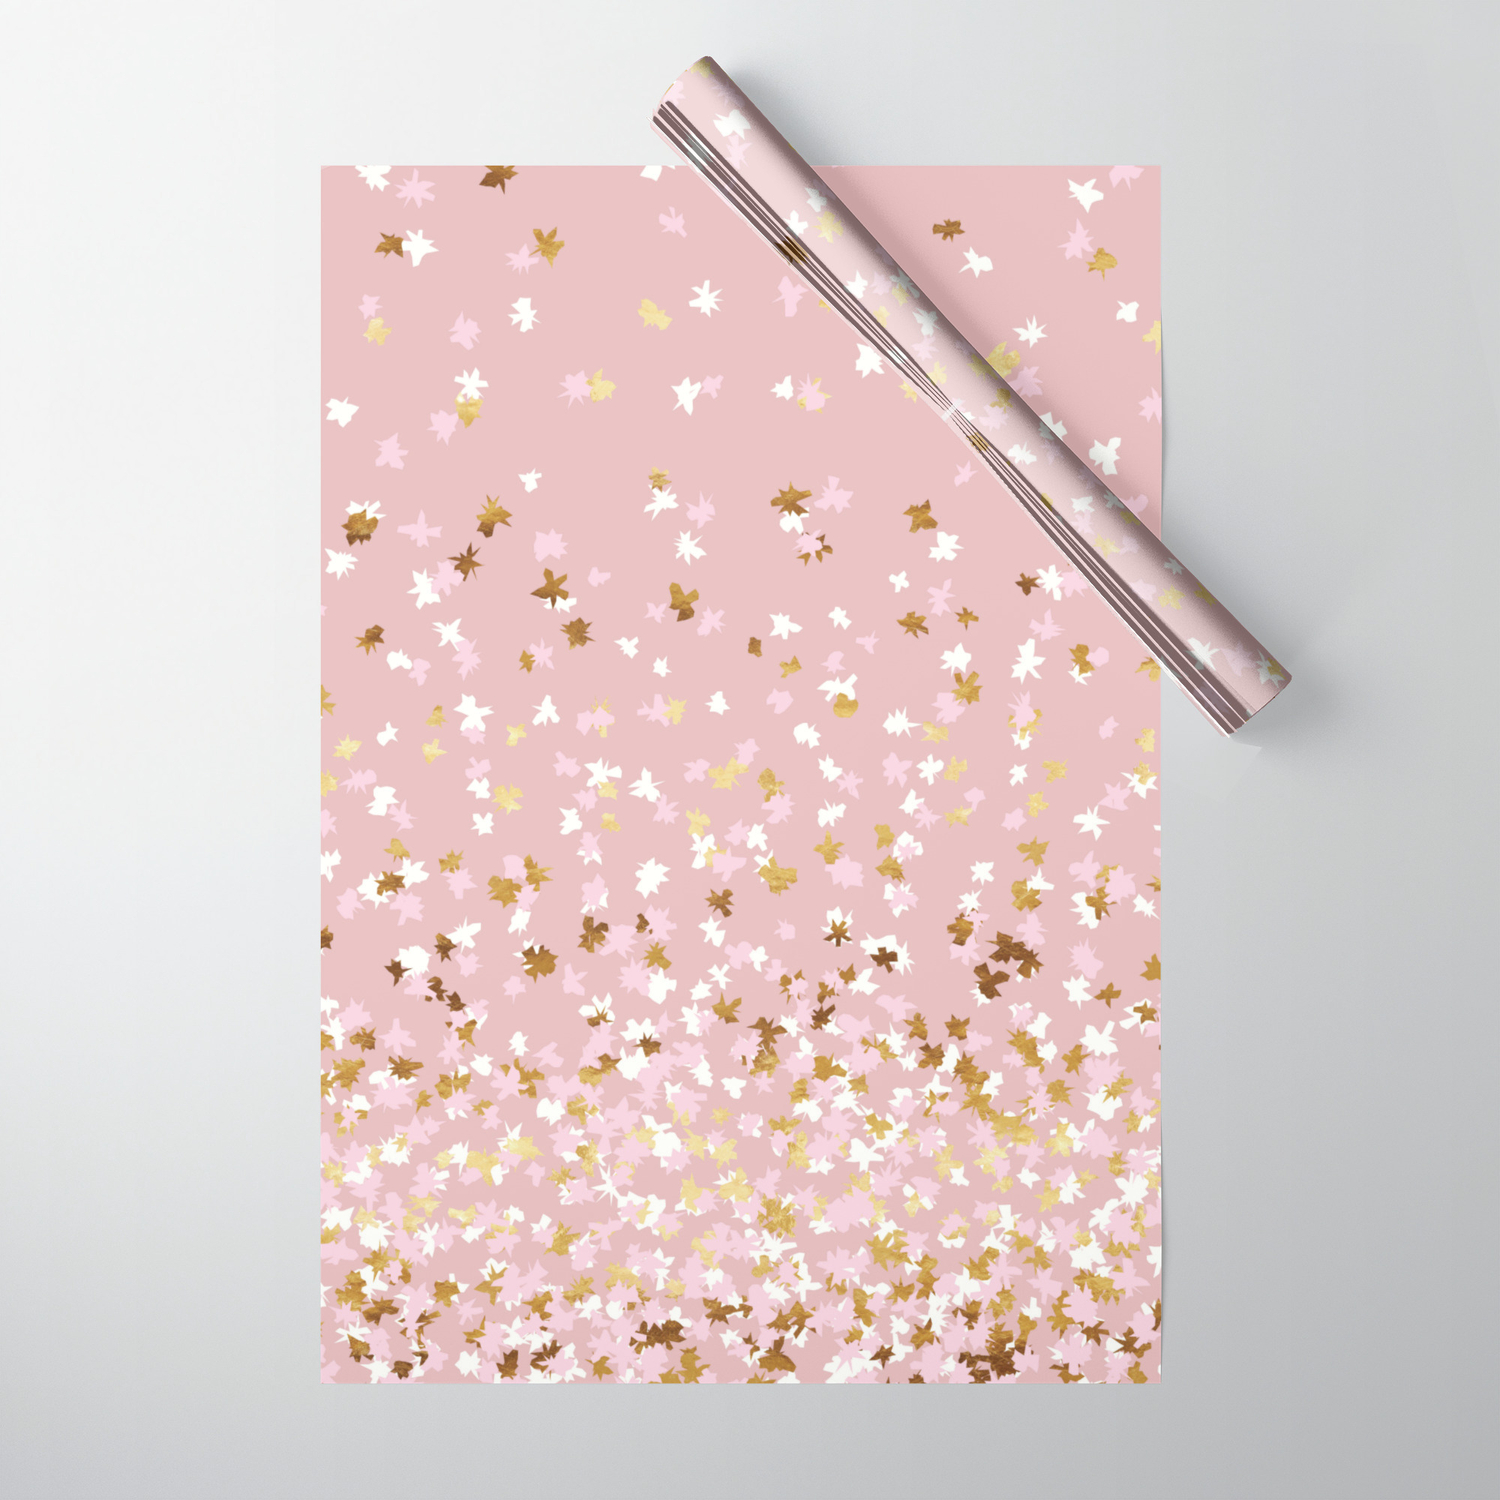 Floating Confetti - Pink Blush and Gold 